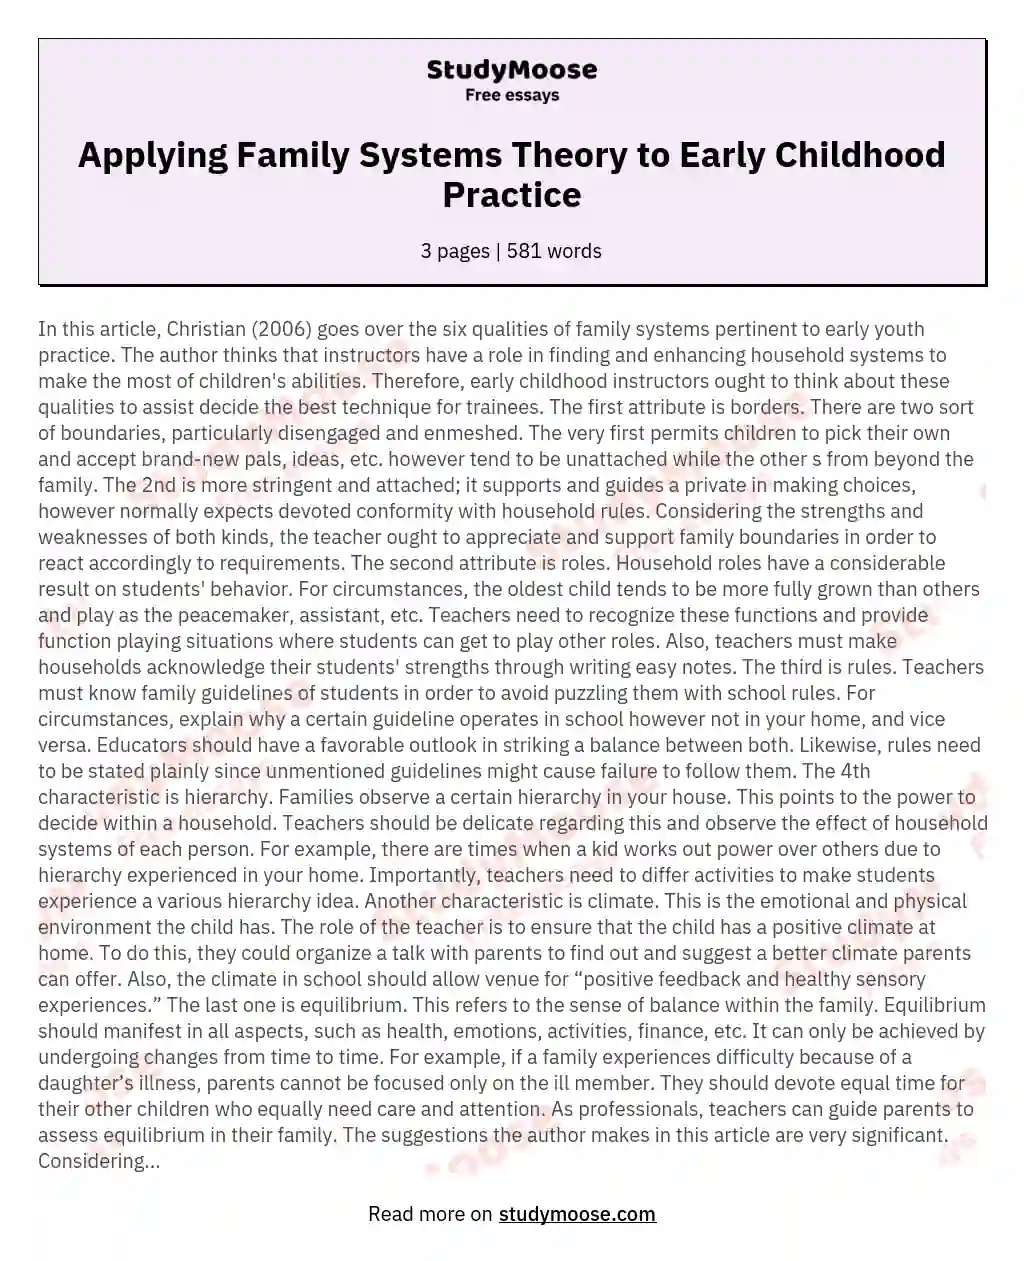 Applying Family Systems Theory to Early Childhood Practice